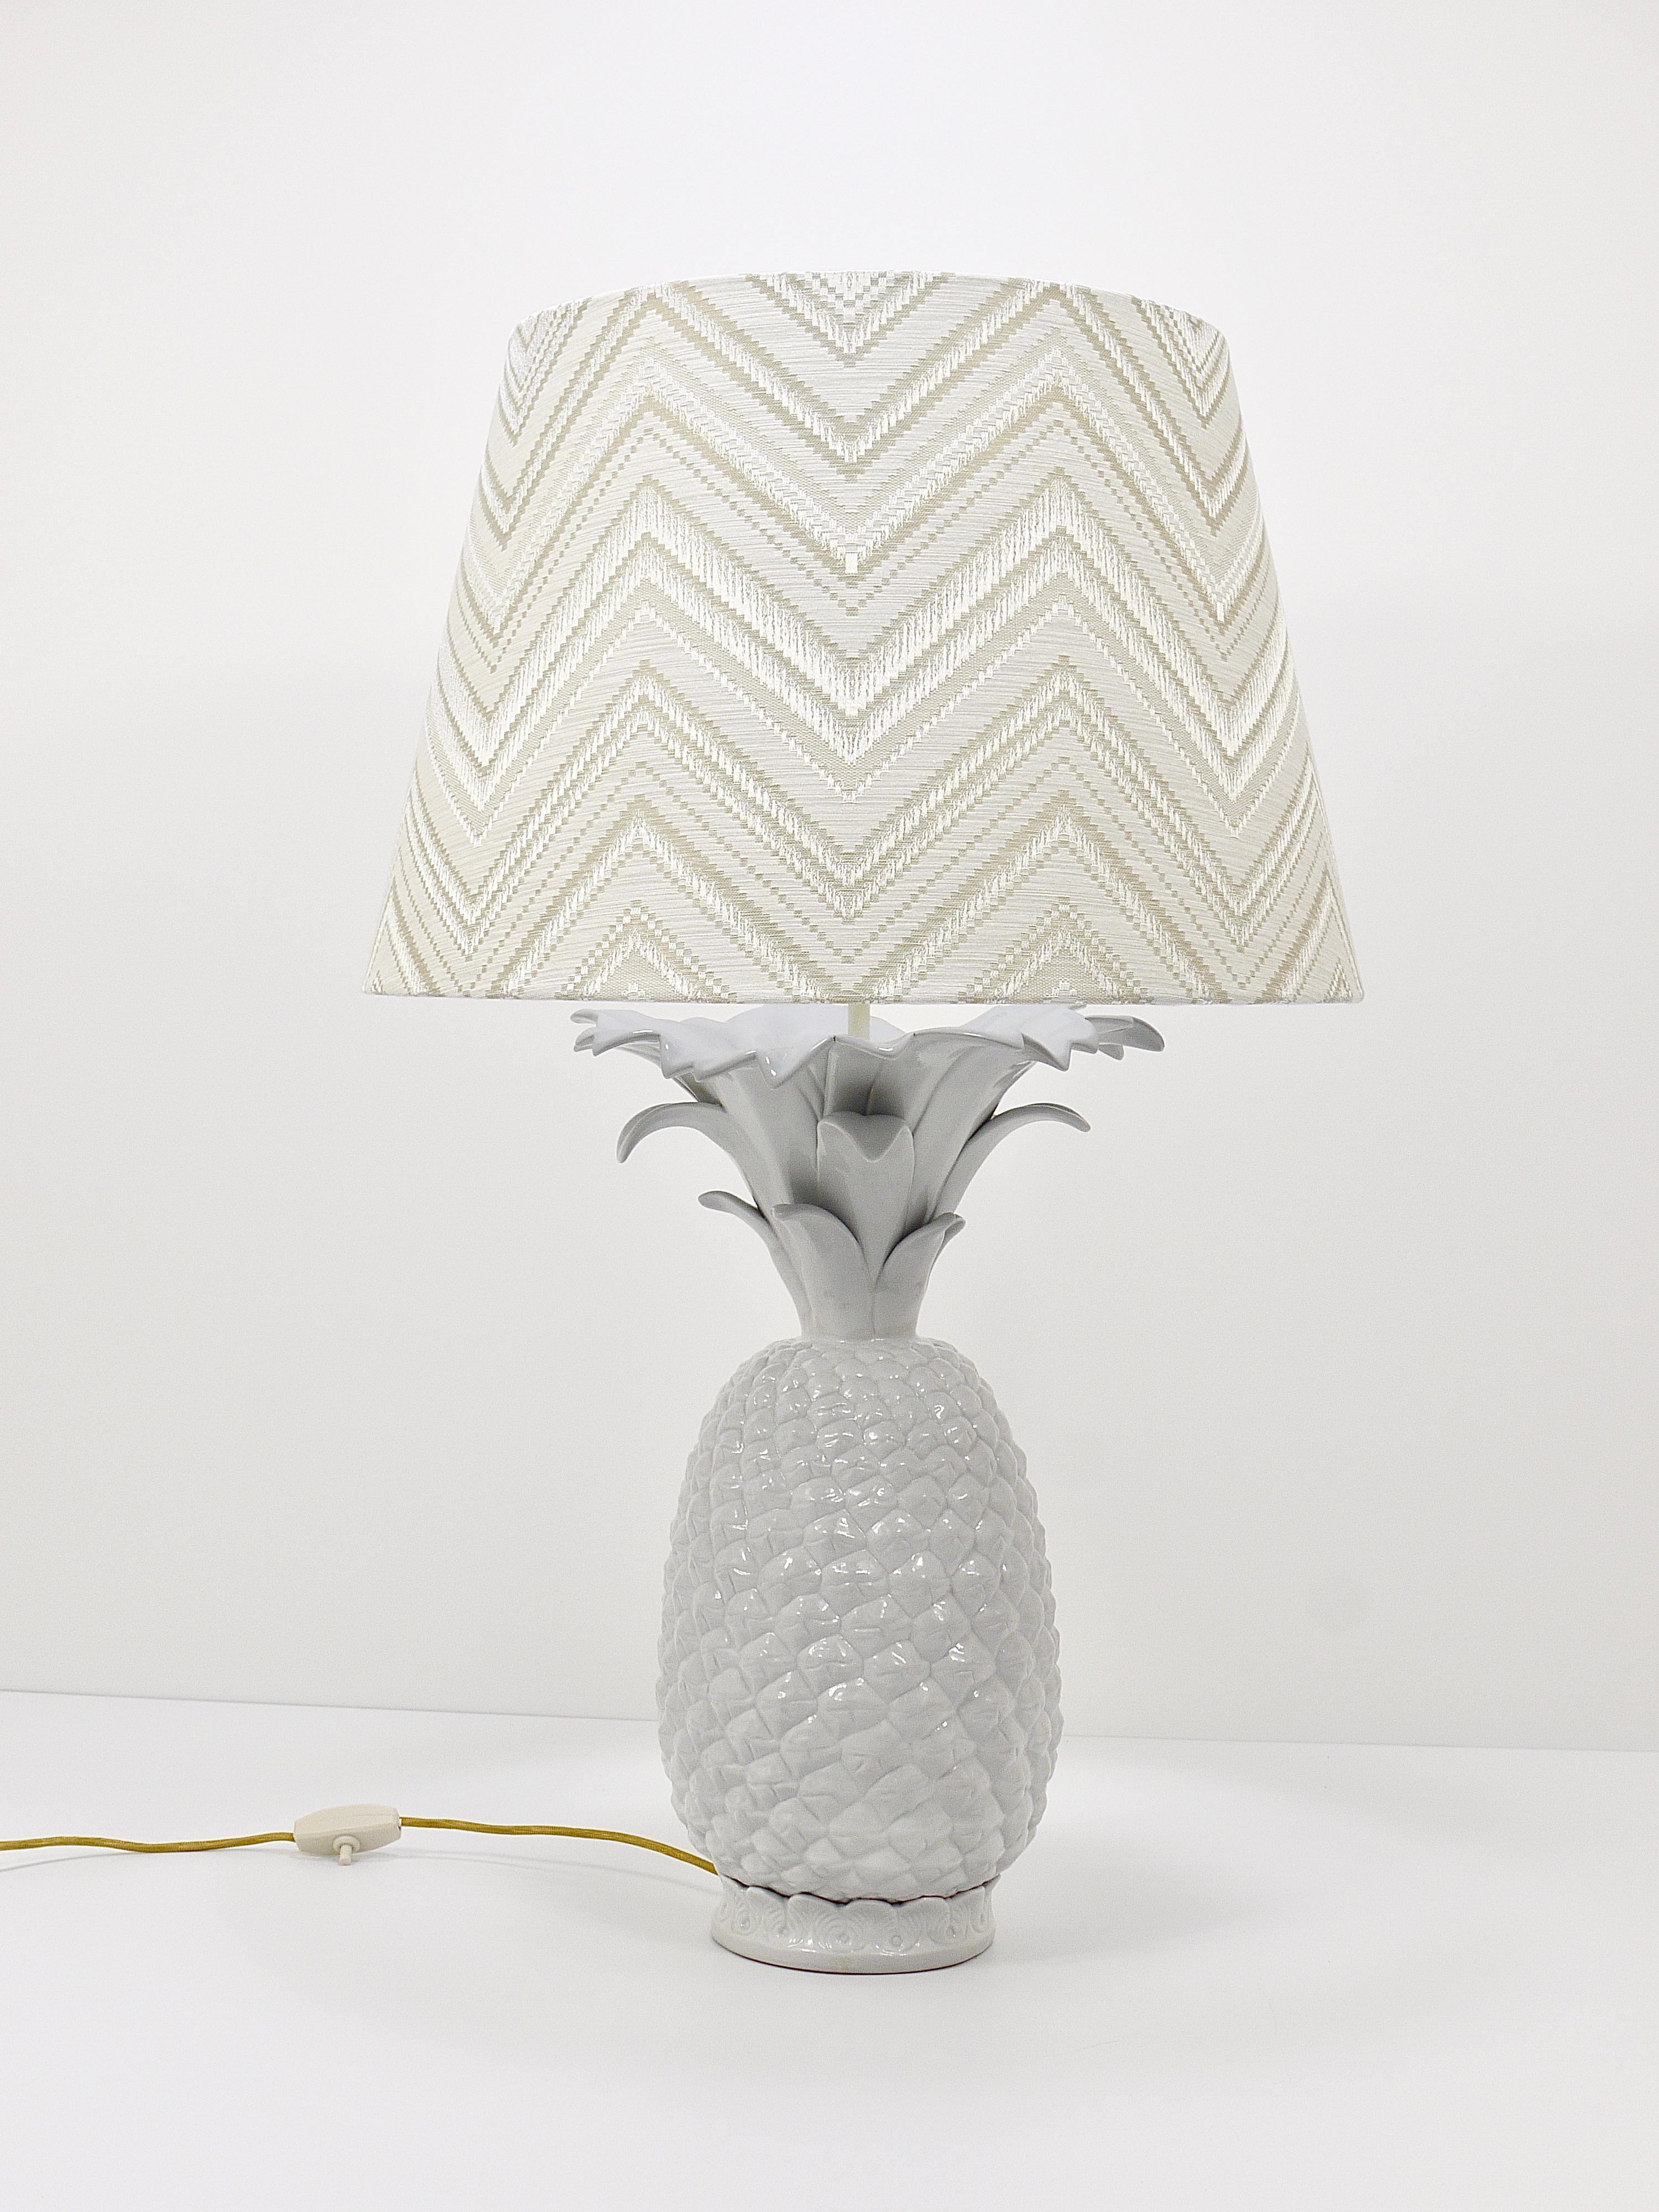 Brass Tommaso Barbi Style White Pineapple Hollywood Regency Table Lamp, Italy, 1970s For Sale